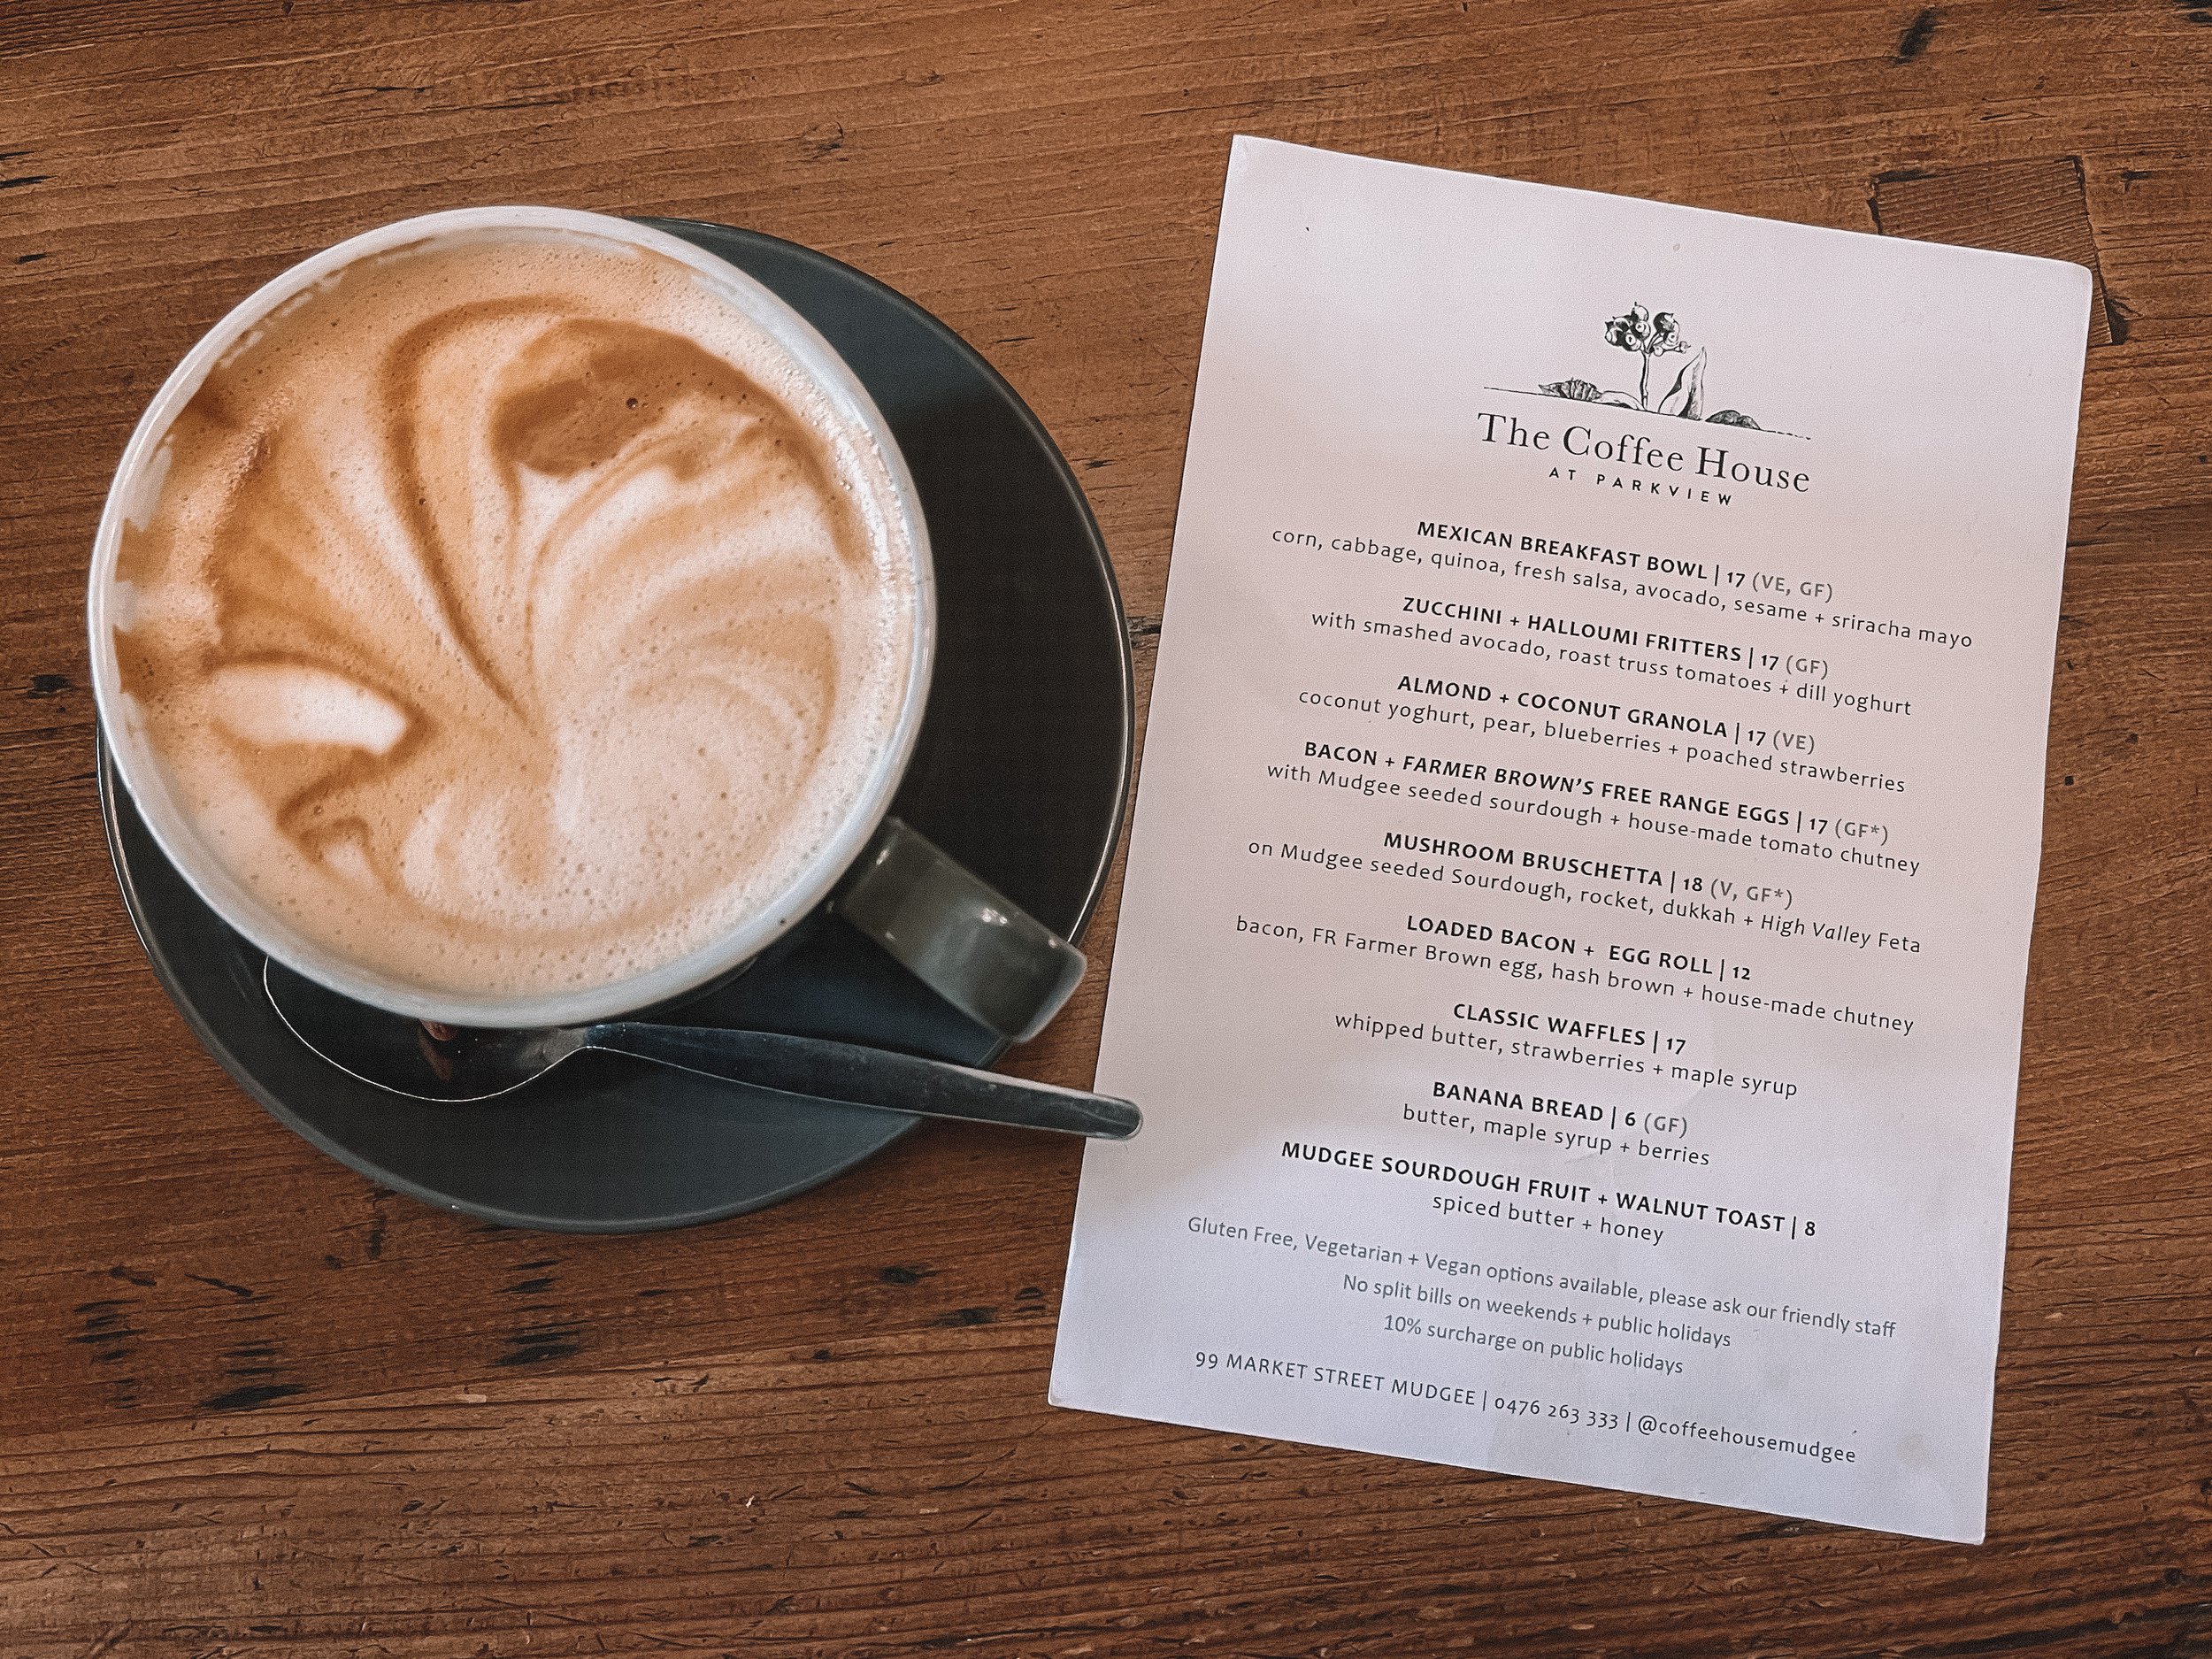 The menu at the Coffee House - Mudgee - New South Wales (NSW) - Australia